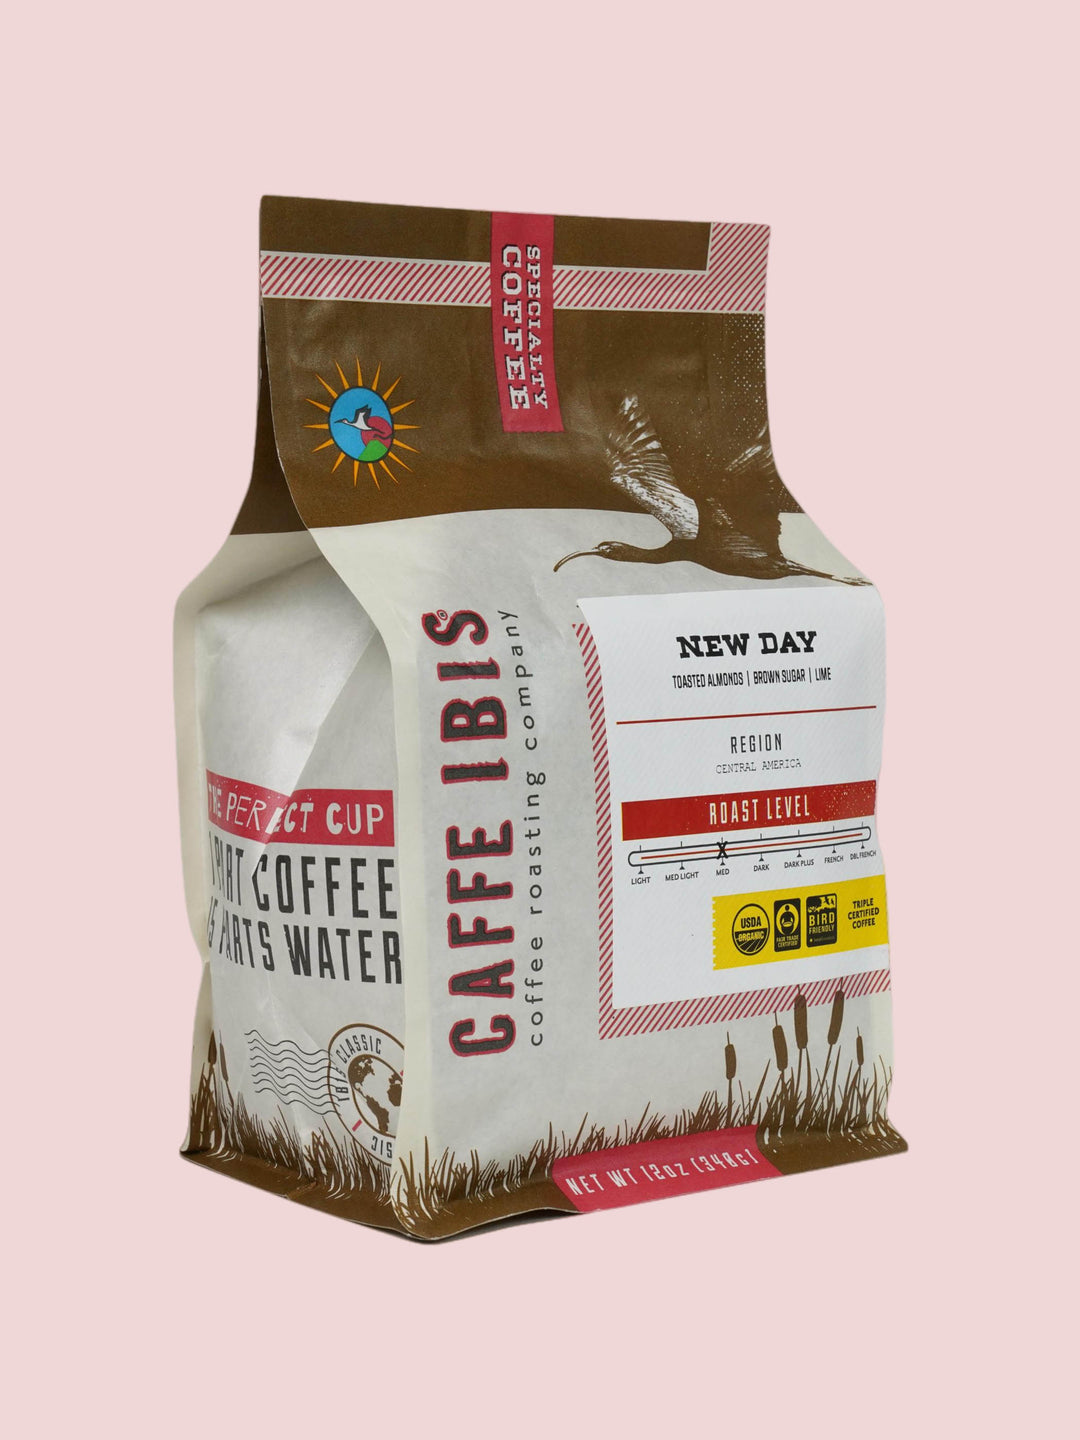 Caffe Ibis Organic New Day coffee in a brown twelve ounce bag; front quarter view.